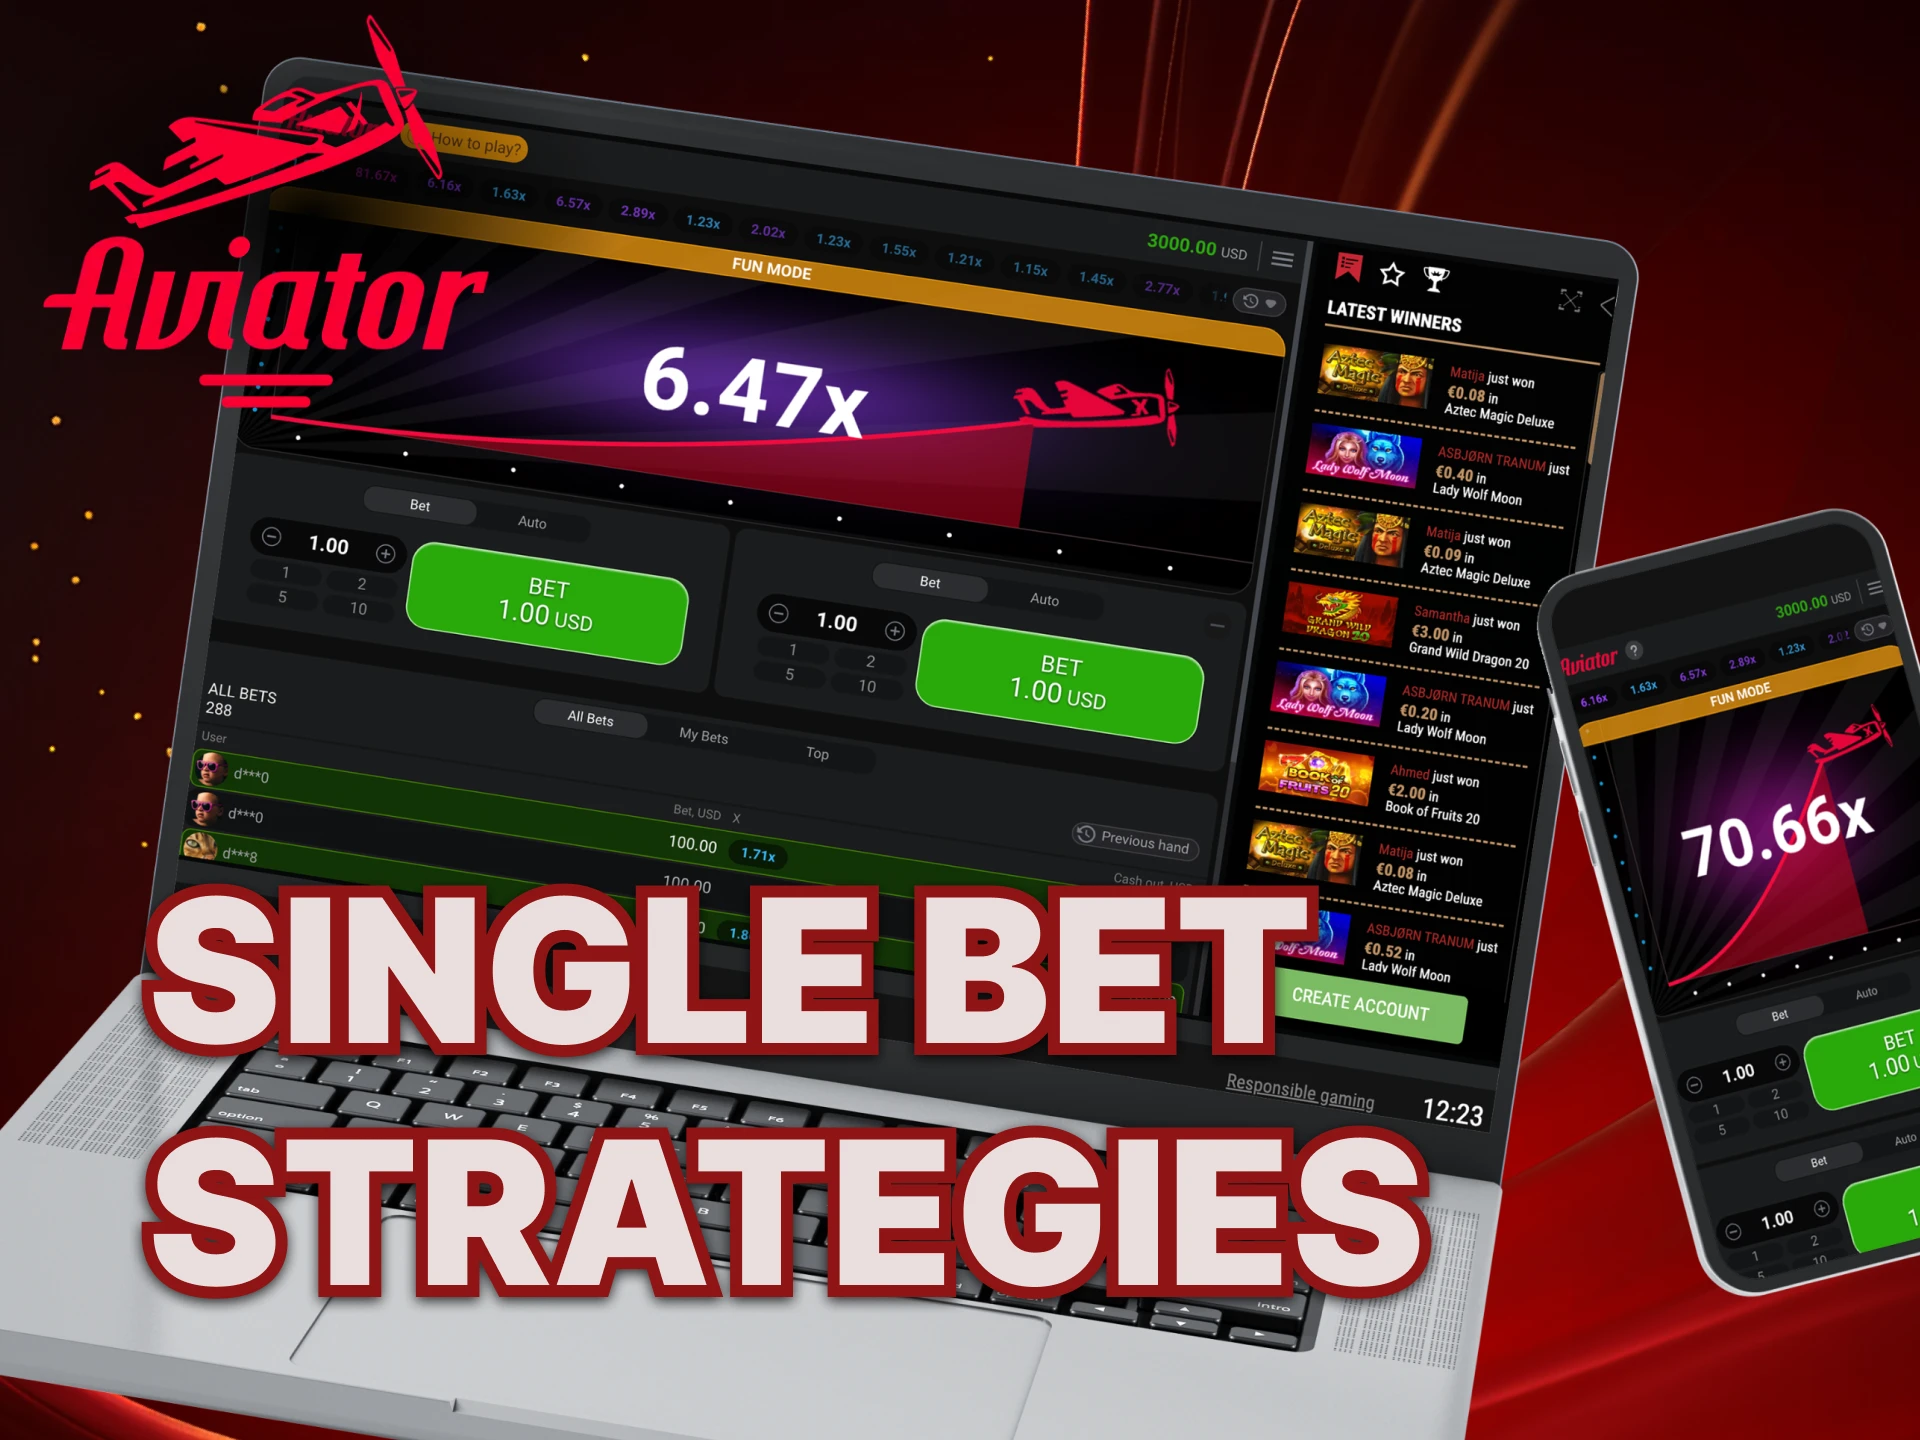 What is Single Bet Strategies for the game Aviator.